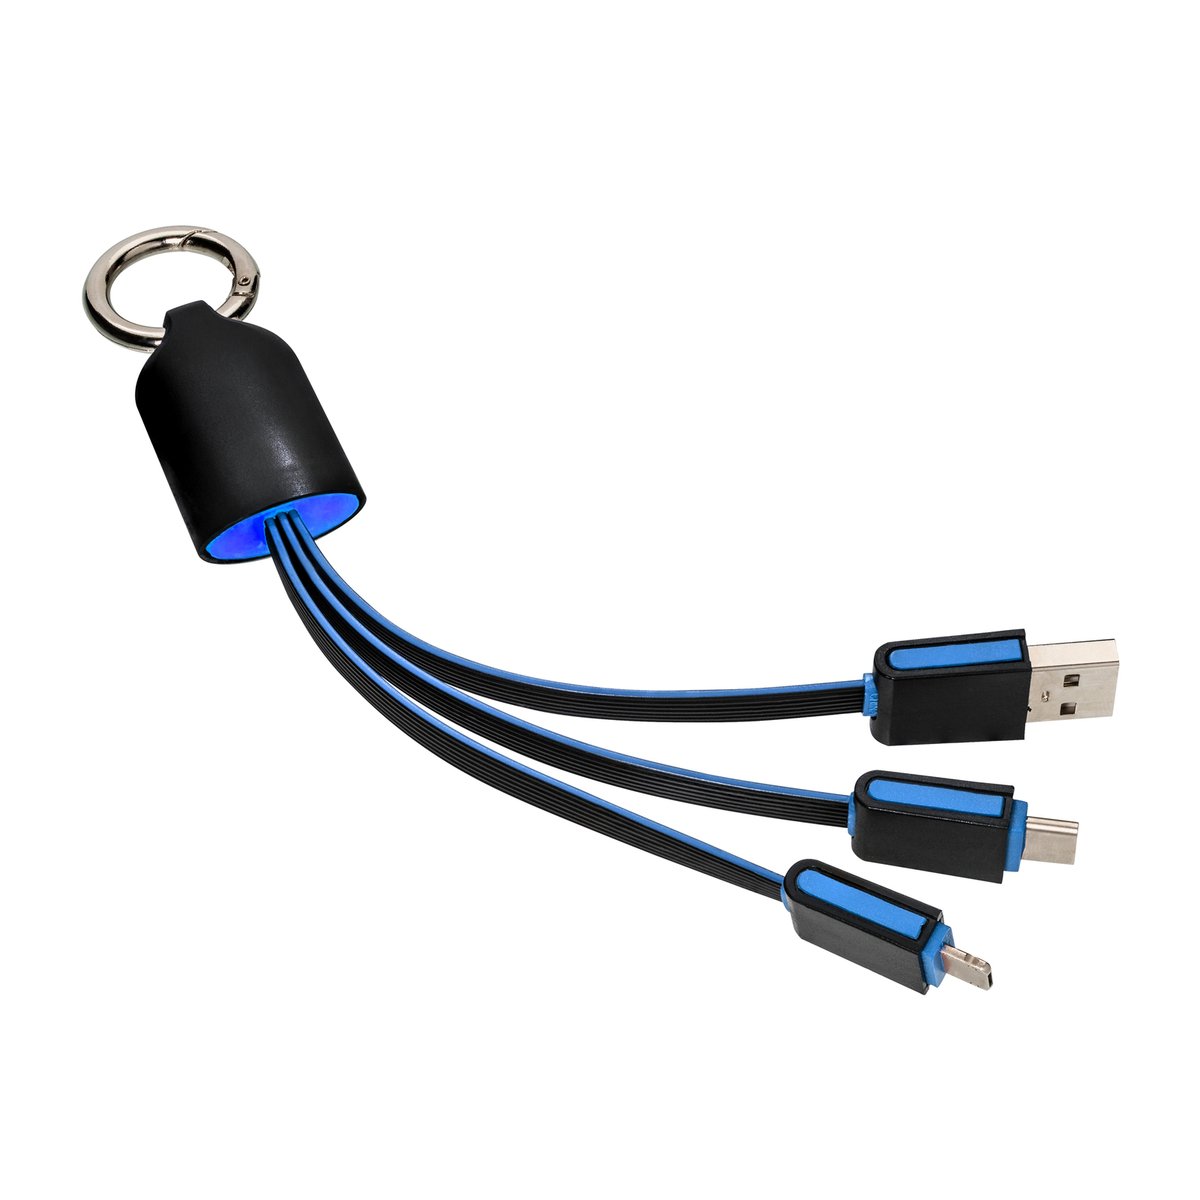 3-in-1 Charging Cable REEVES-ABILENE black/blue